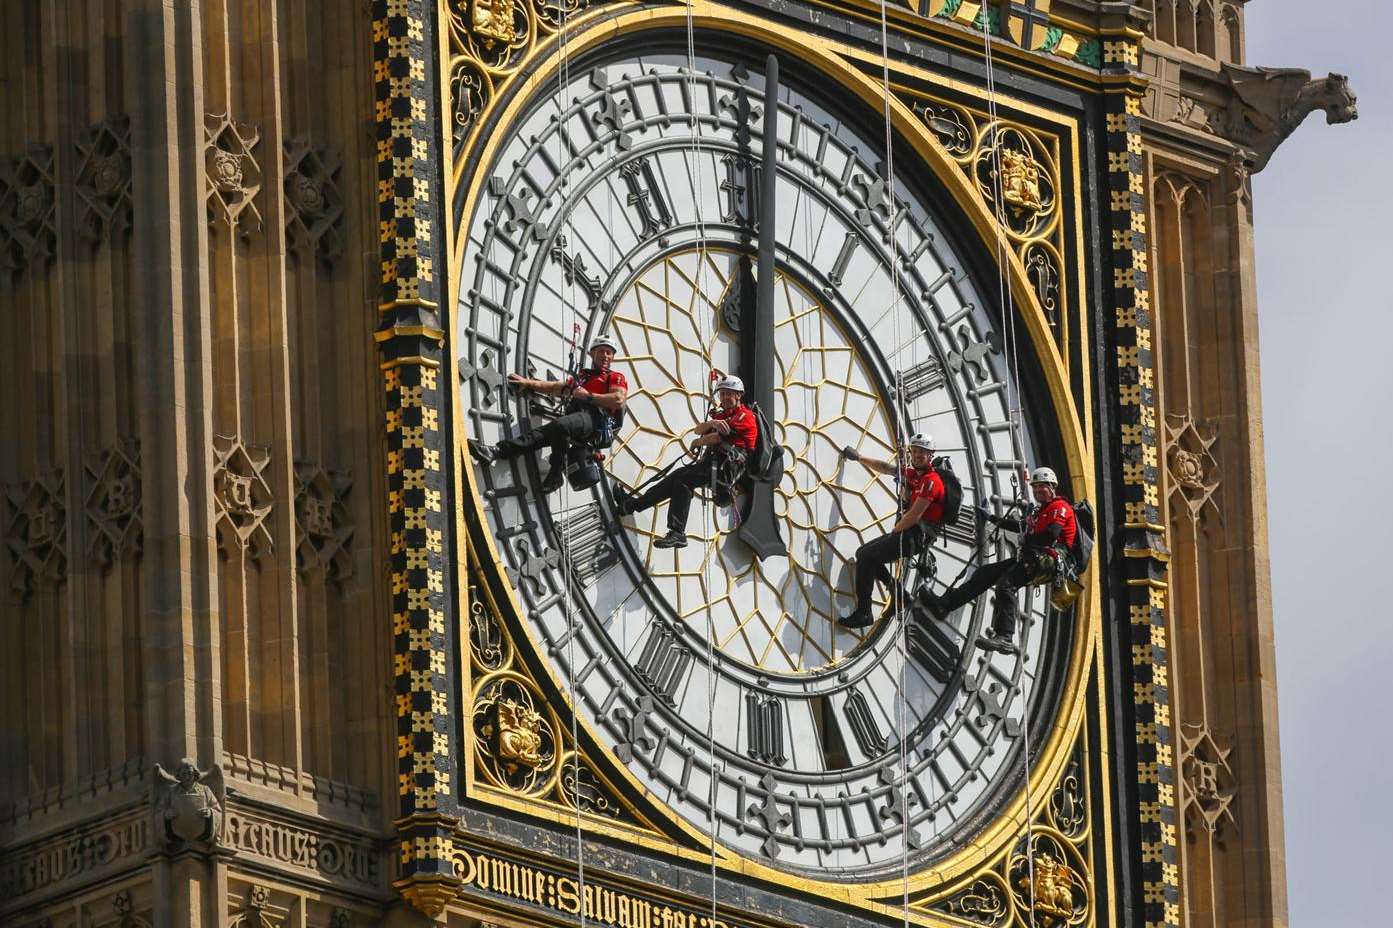 The Big Ben tower is at the heart of UK time-keeping - here it gets a spruce-up